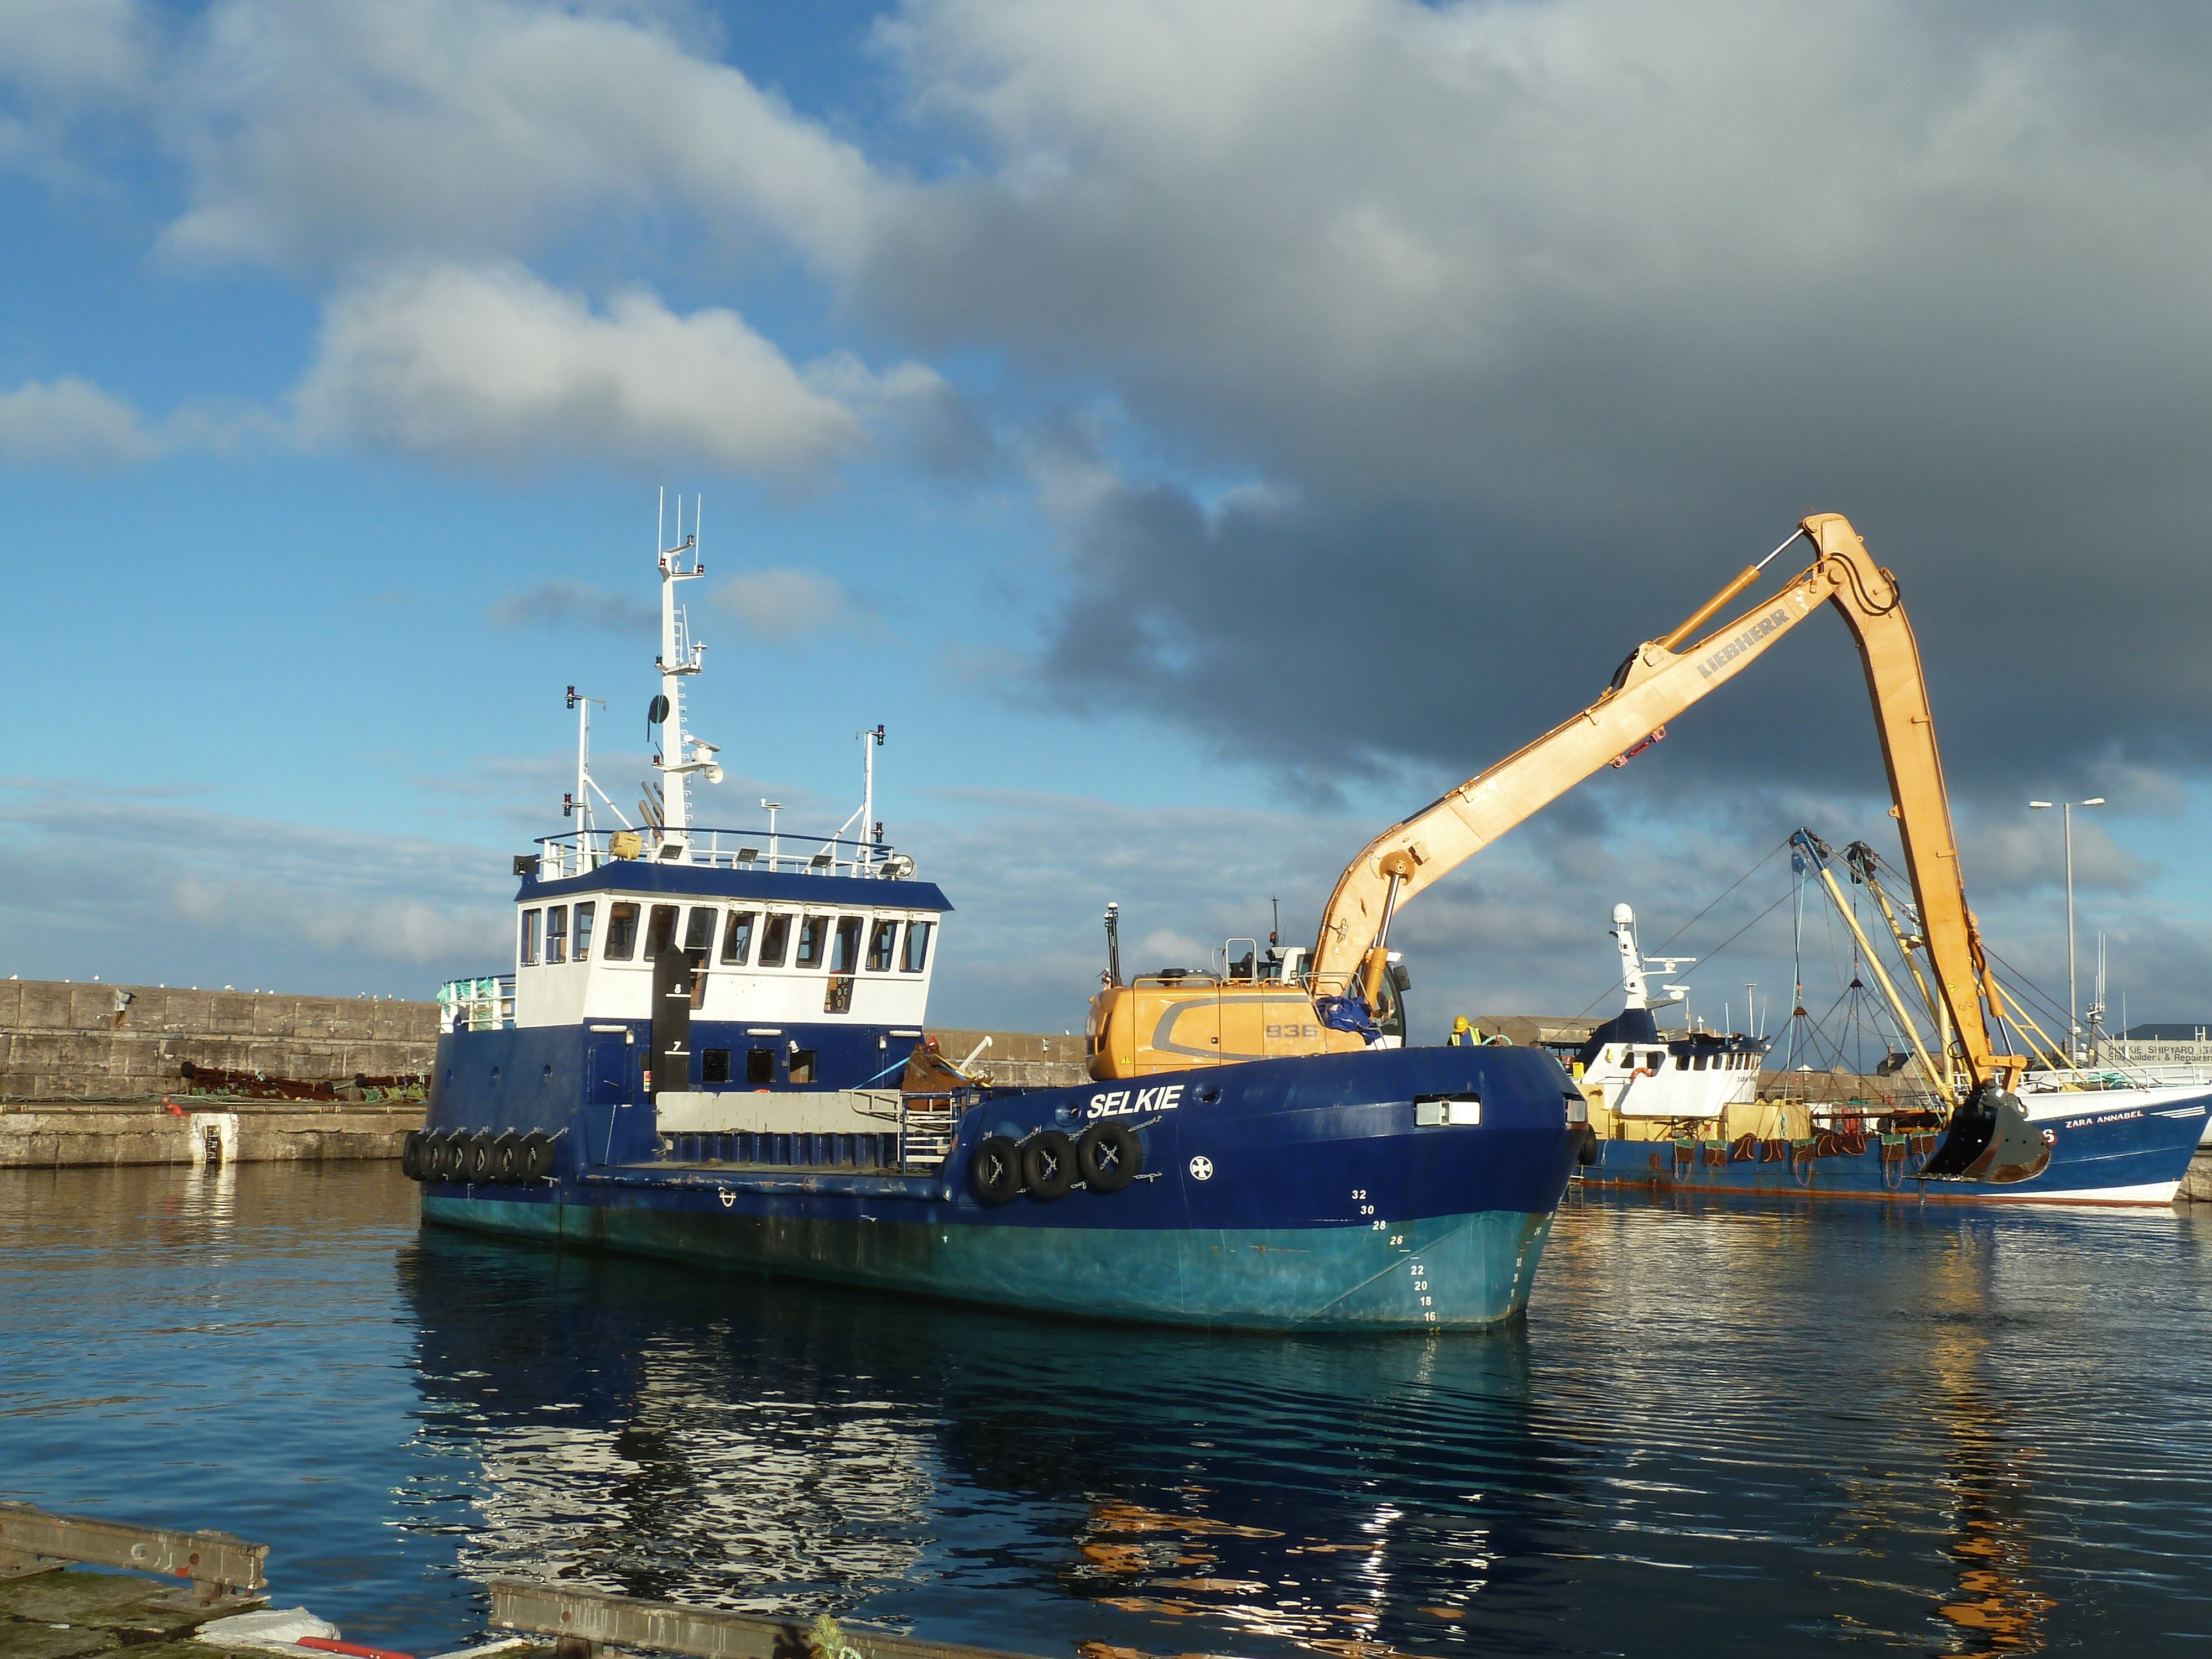 The Selkie is based at Buckie Harbour.